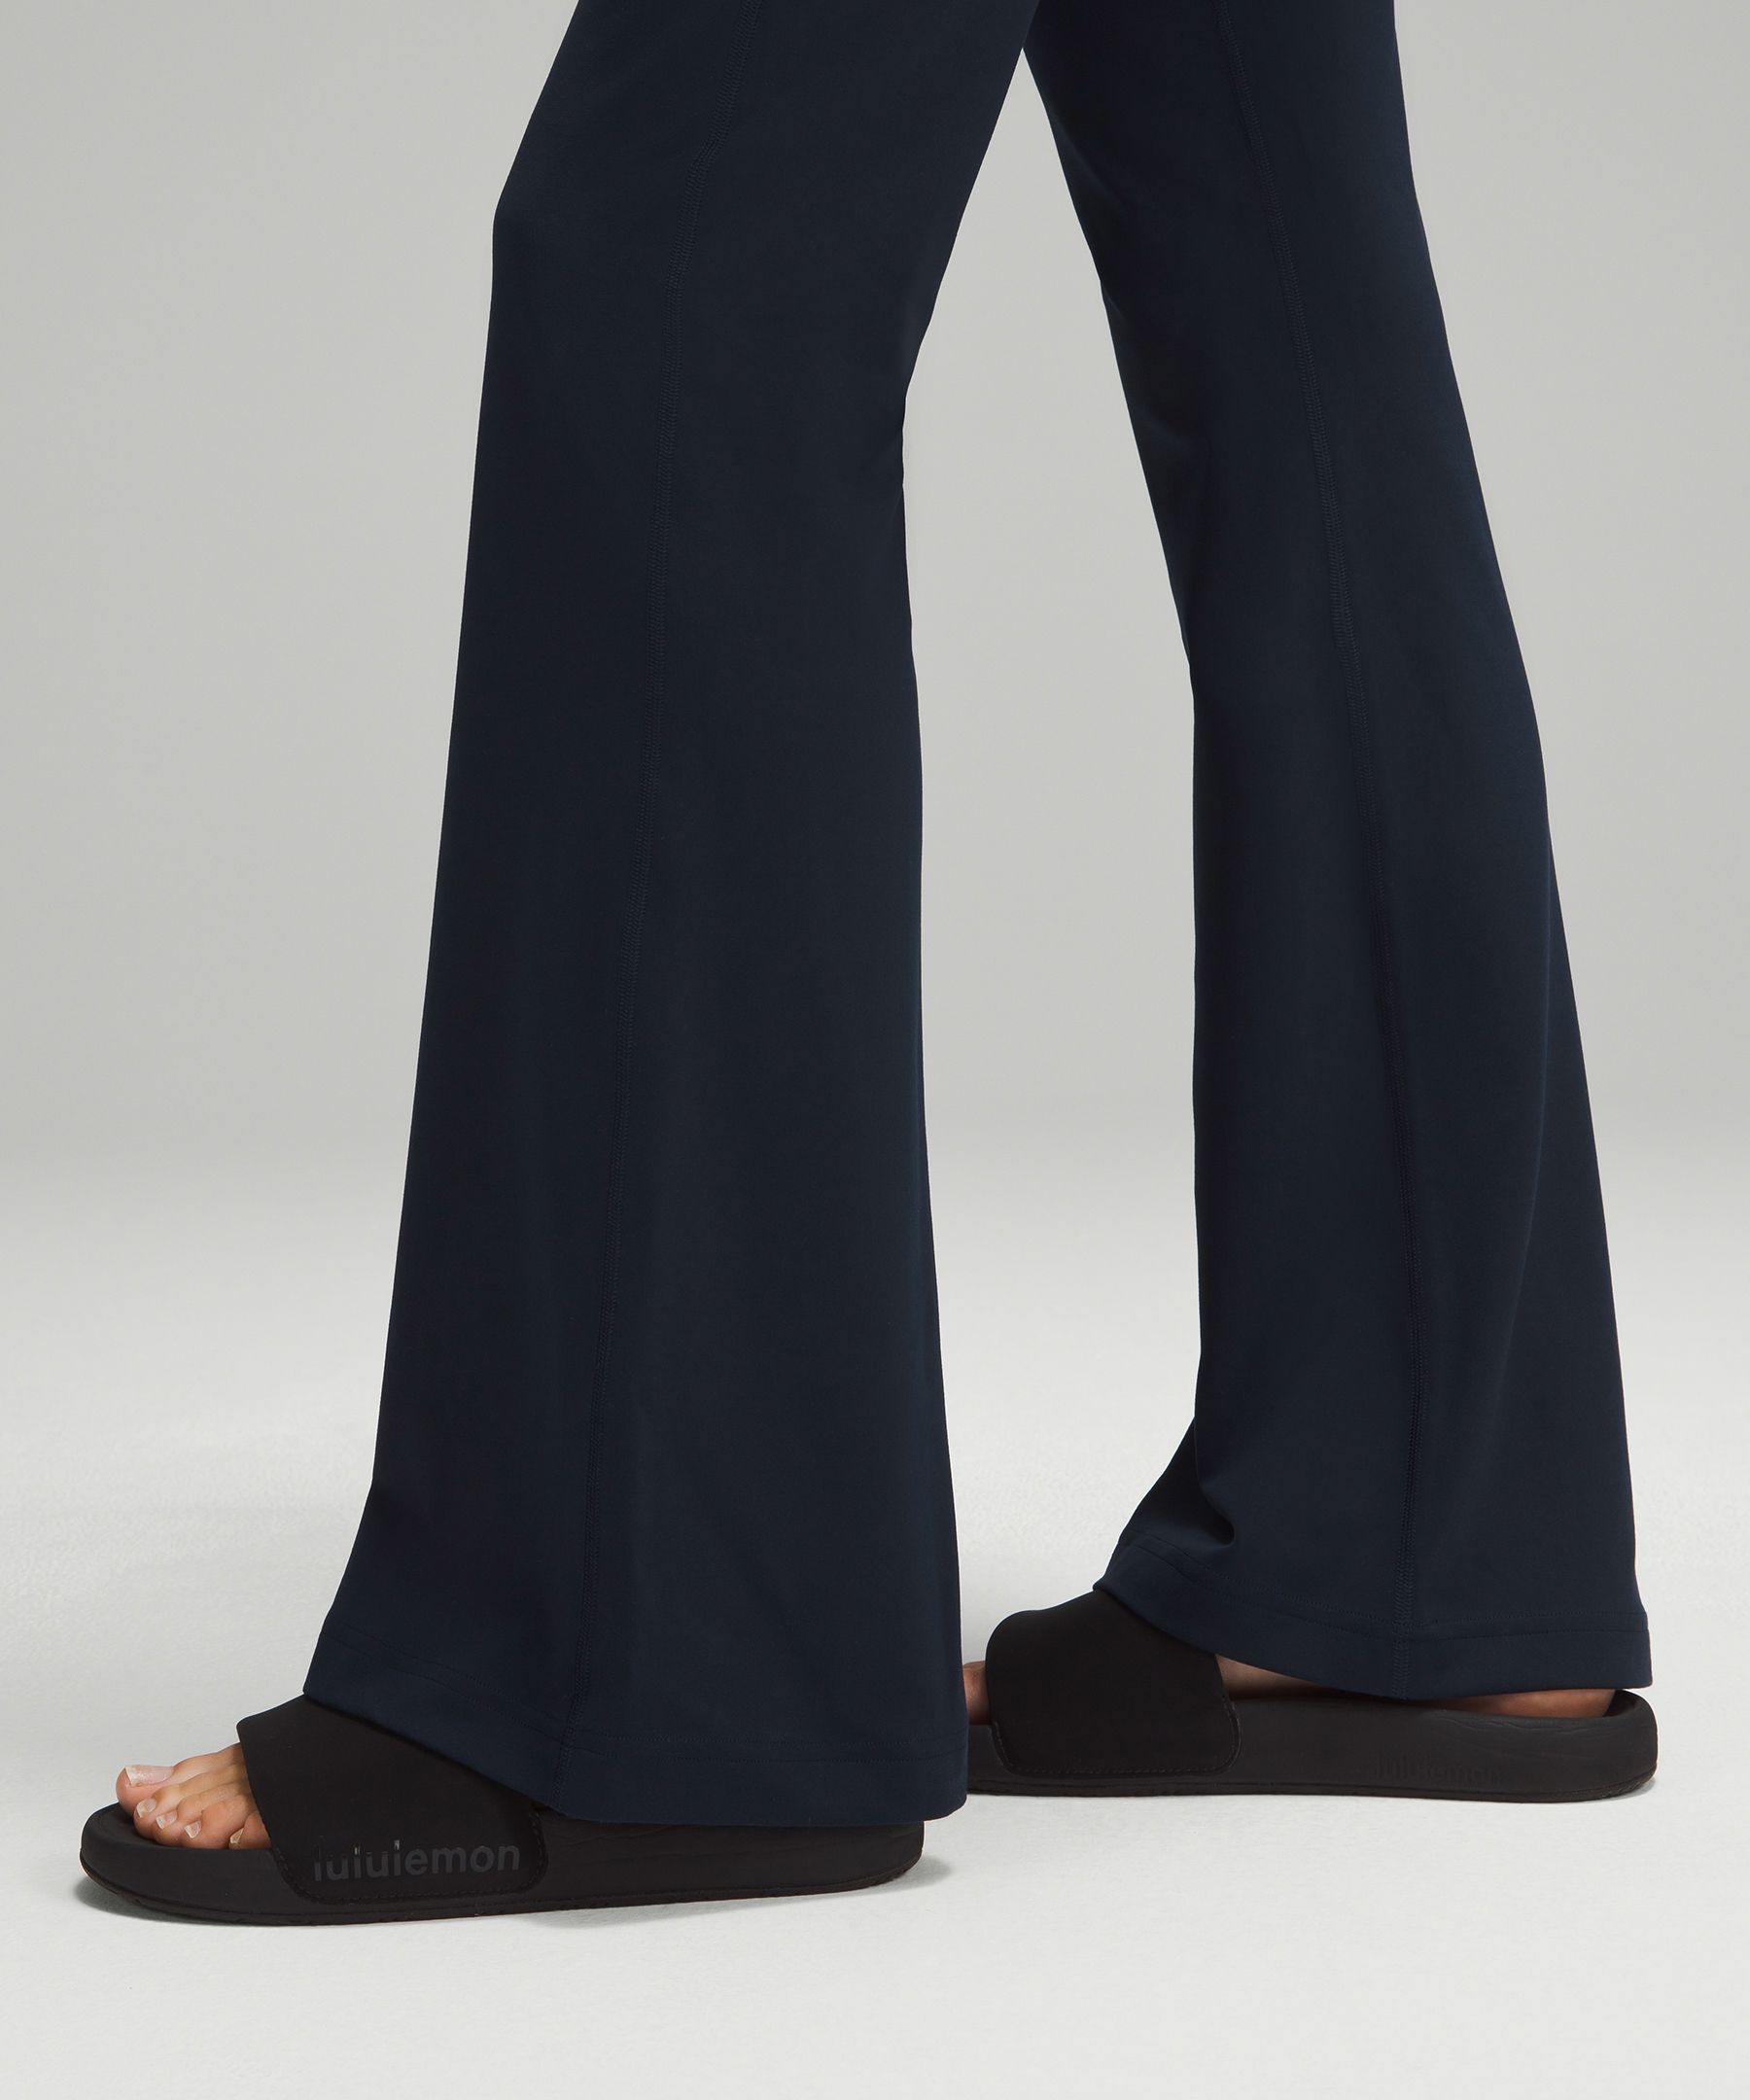 Groove Pant Flare Nulu (6CAD) 🥰 I have the black and this is the navy. BUY  BUY BUY haha sooo comfy. So flattering. Perfect for training and for out  and about. If